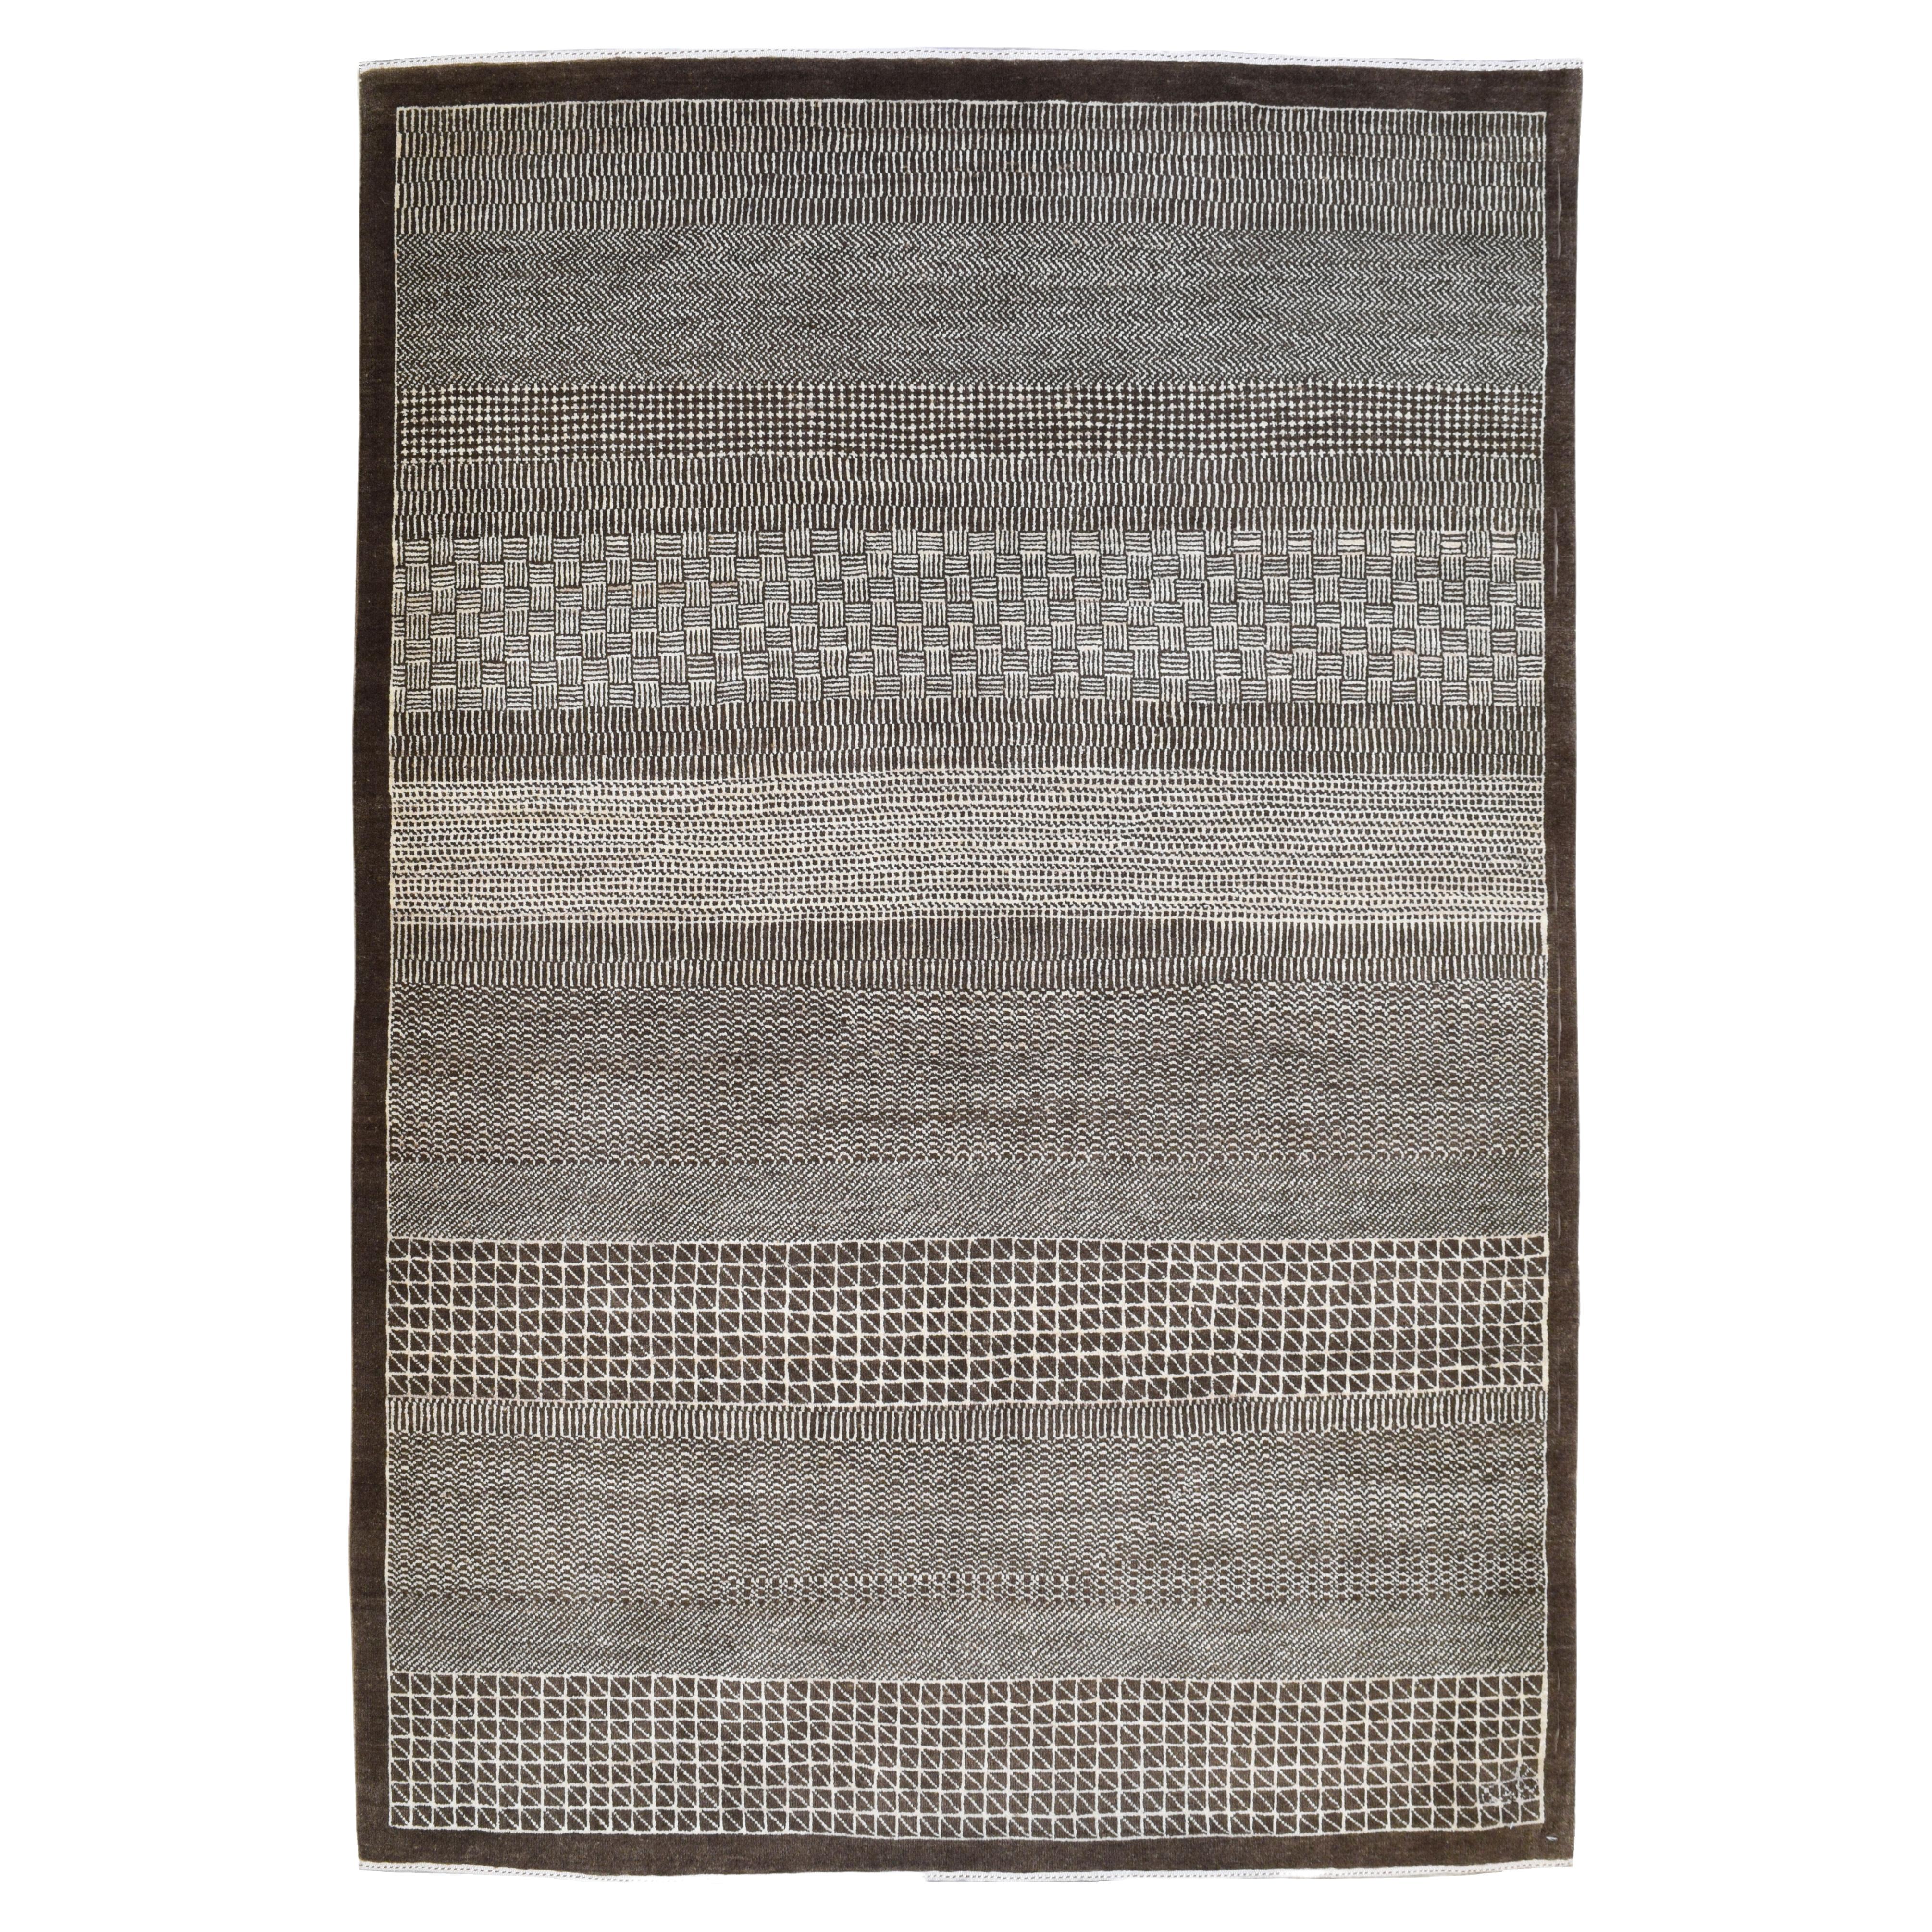 Brown and Cream Modern Architectural "Rain" Area Rug from Orley Shabahang, 5 x 7